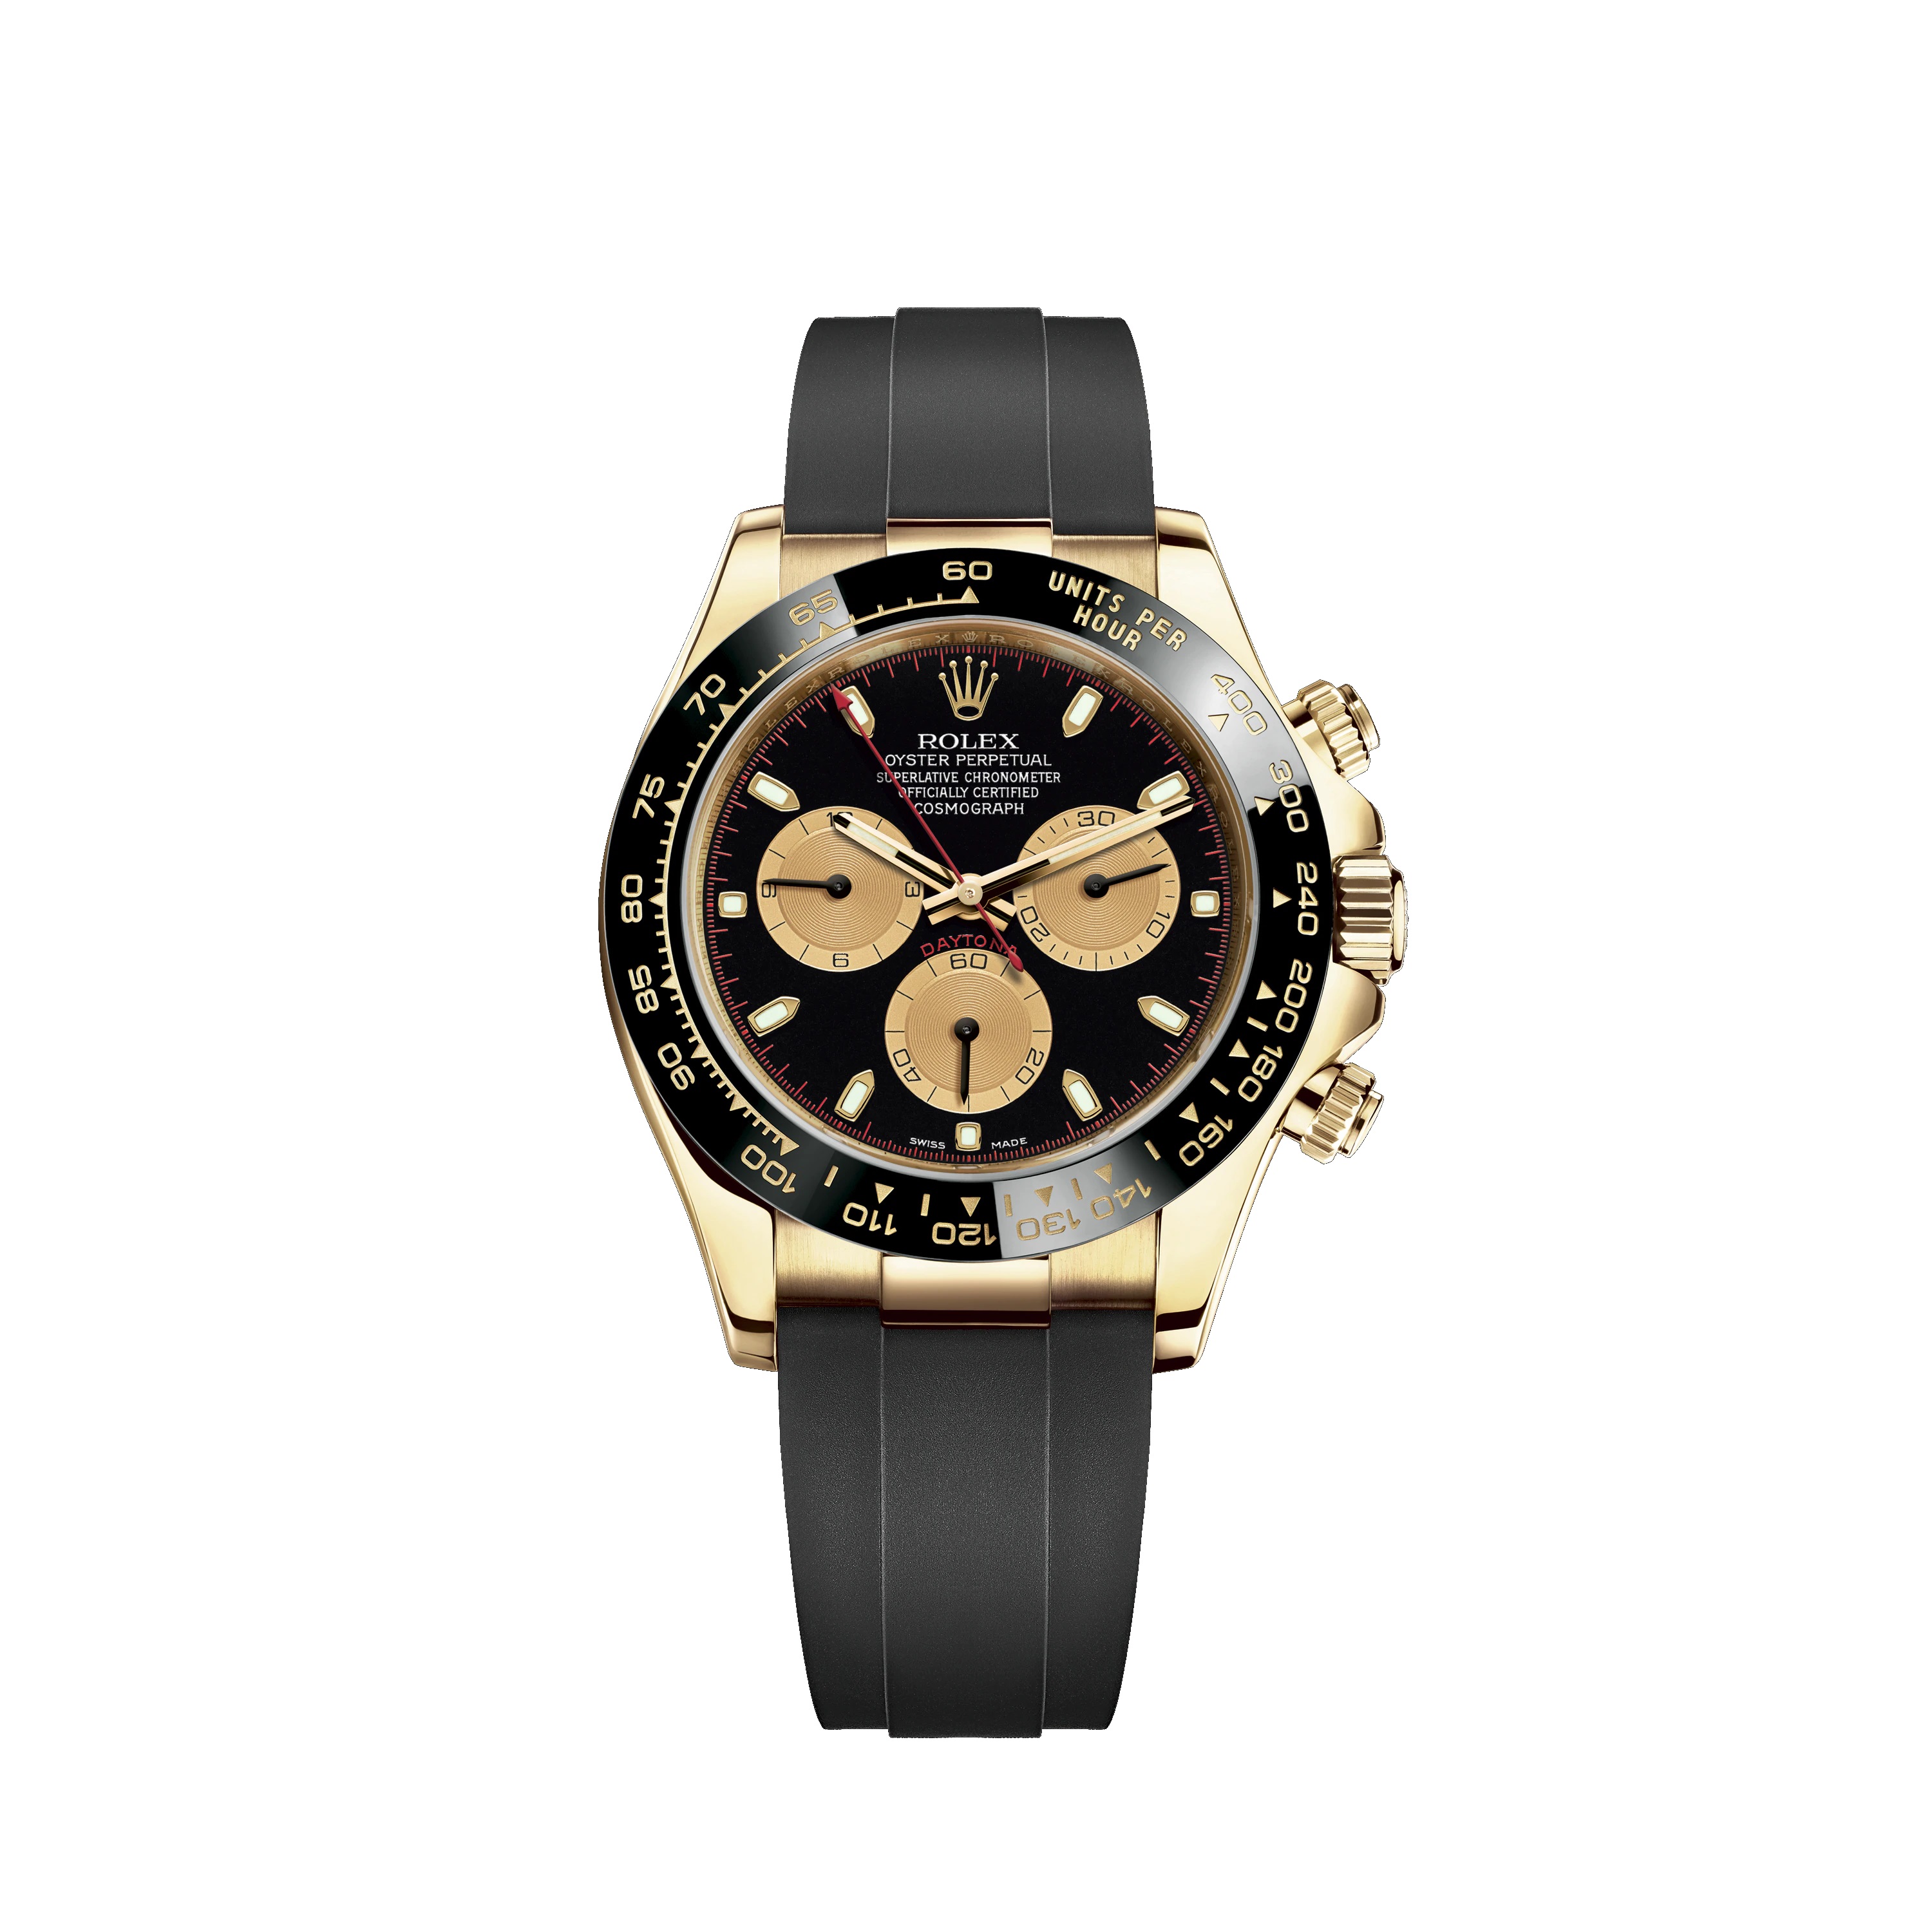 Cosmograph Daytona 116518LN Gold Watch (Black and Champagne-Colour)